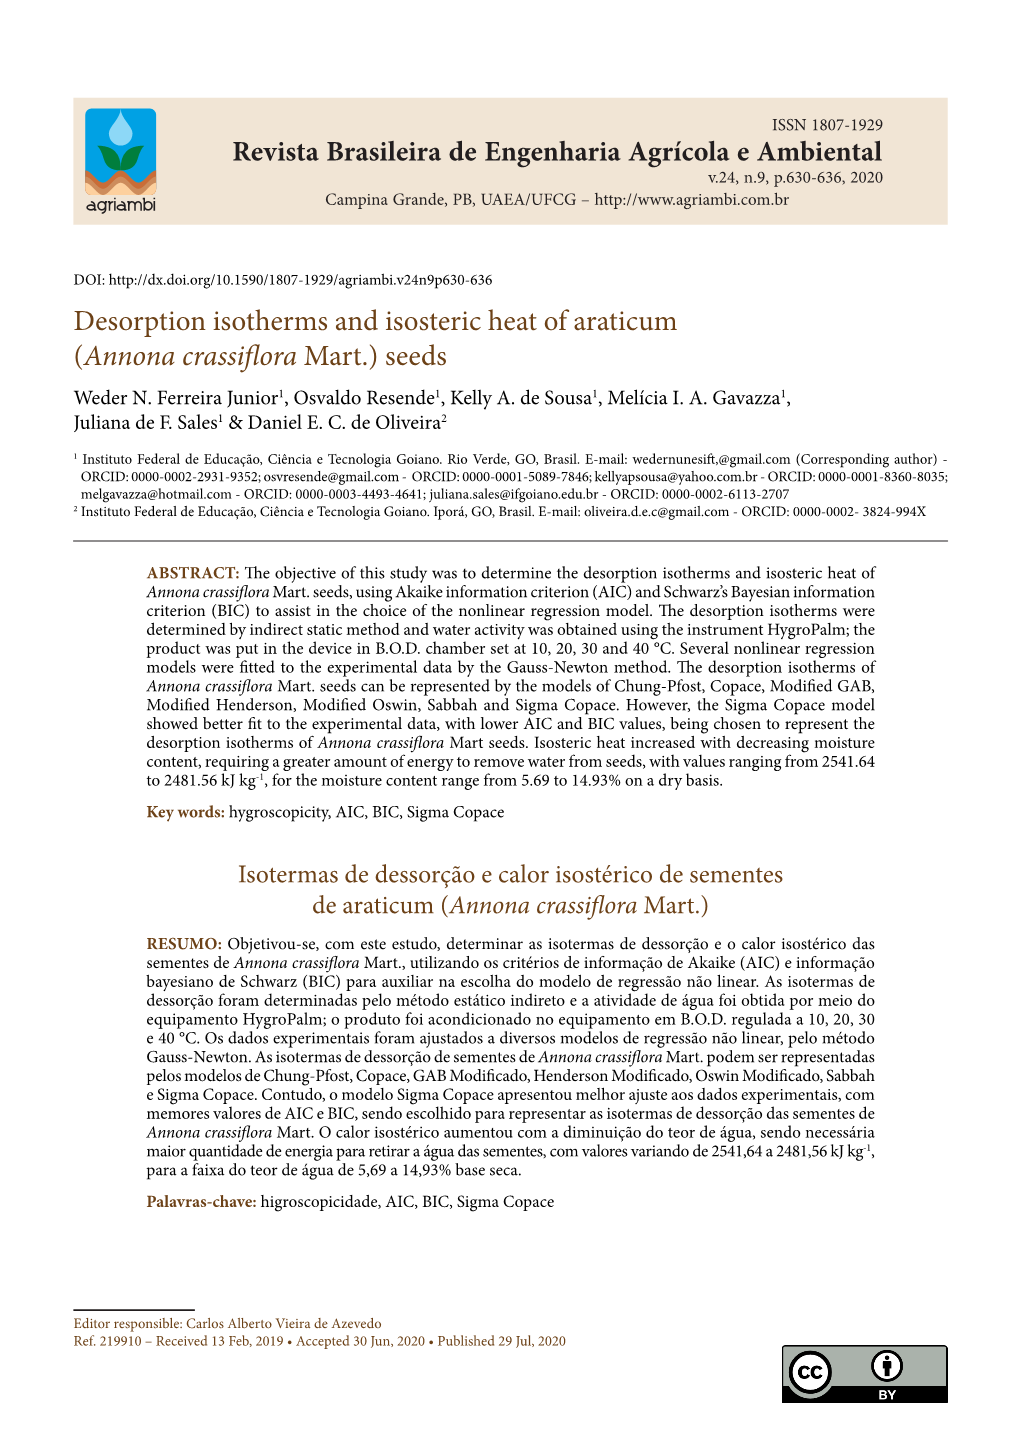 Desorption Isotherms and Isosteric Heat of Araticum (Annona Crassiflora Mart.) Seeds Weder N